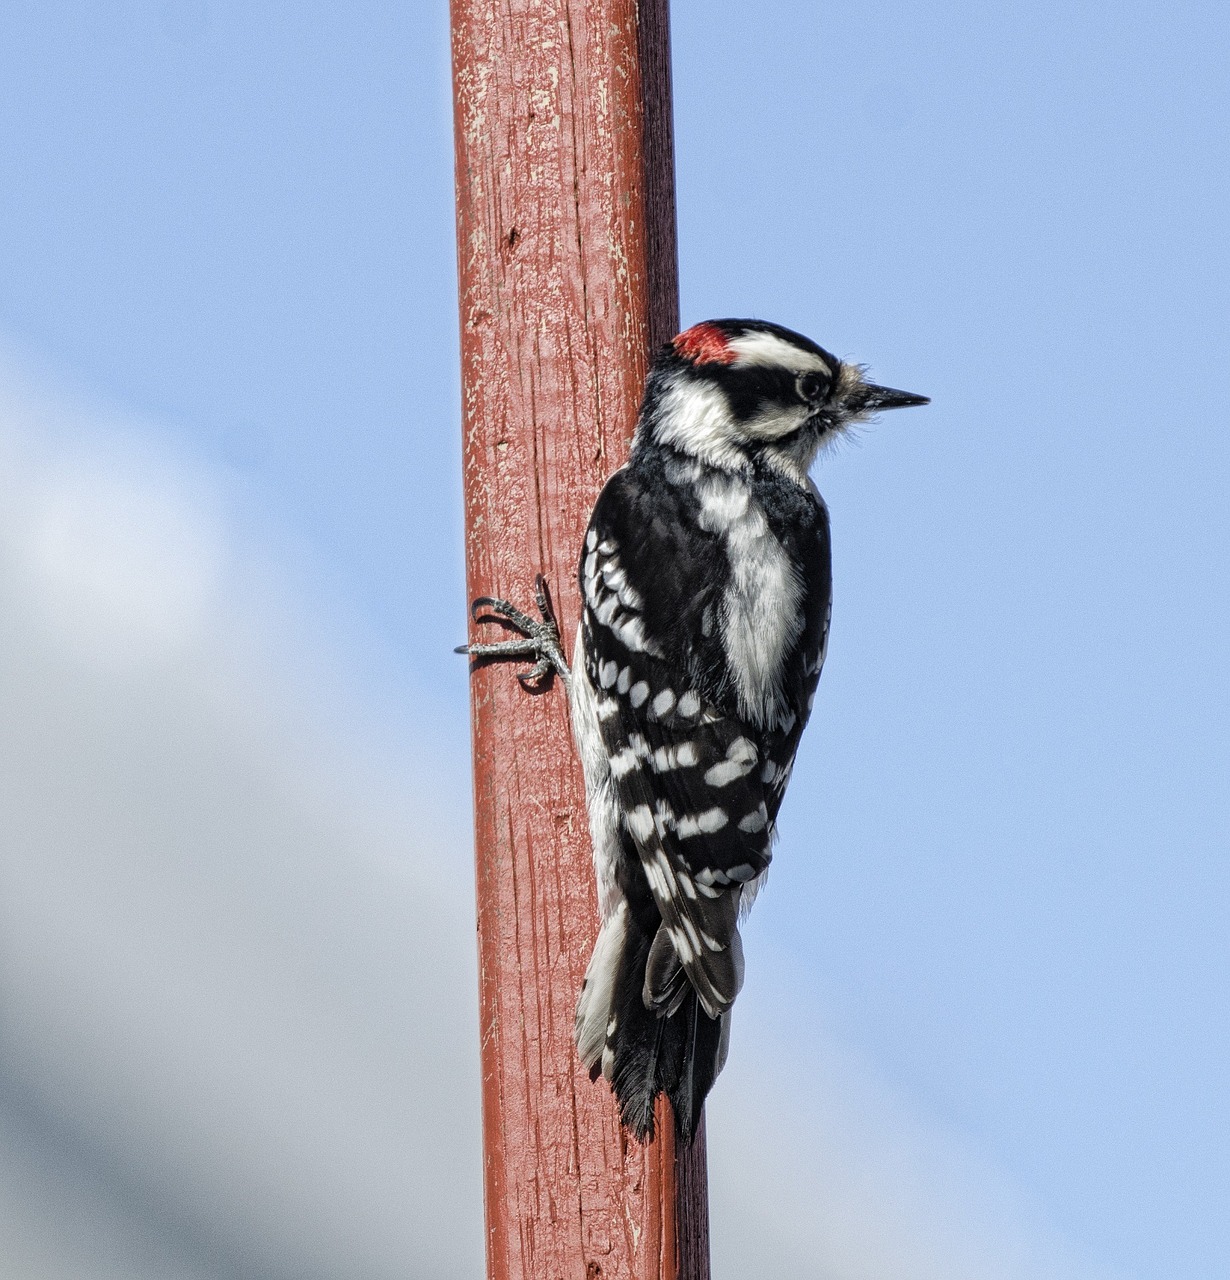 a downy woodpecker resting on a wooden pole